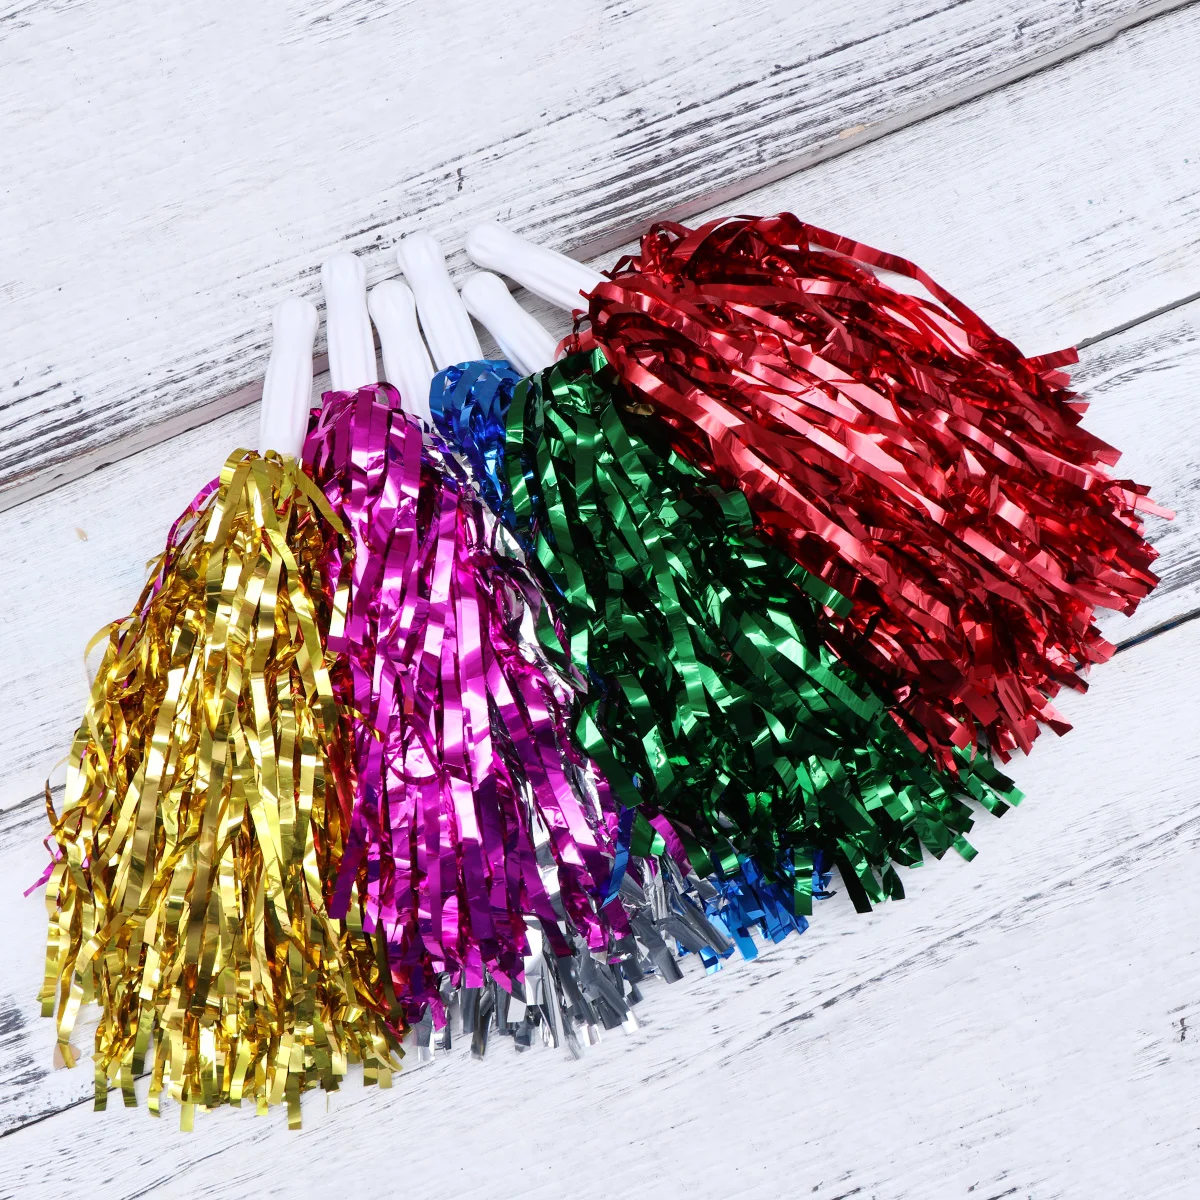 12pcs Straight Handle Cheering Poms Spirited Fun Cheerleading Kit Cheer Props for Performance Competition Cheering Sports Events 12pcs stray kids lightstick glitter cheer pom poms cheerleading poms spirited fun pom poms for school competition sports stray